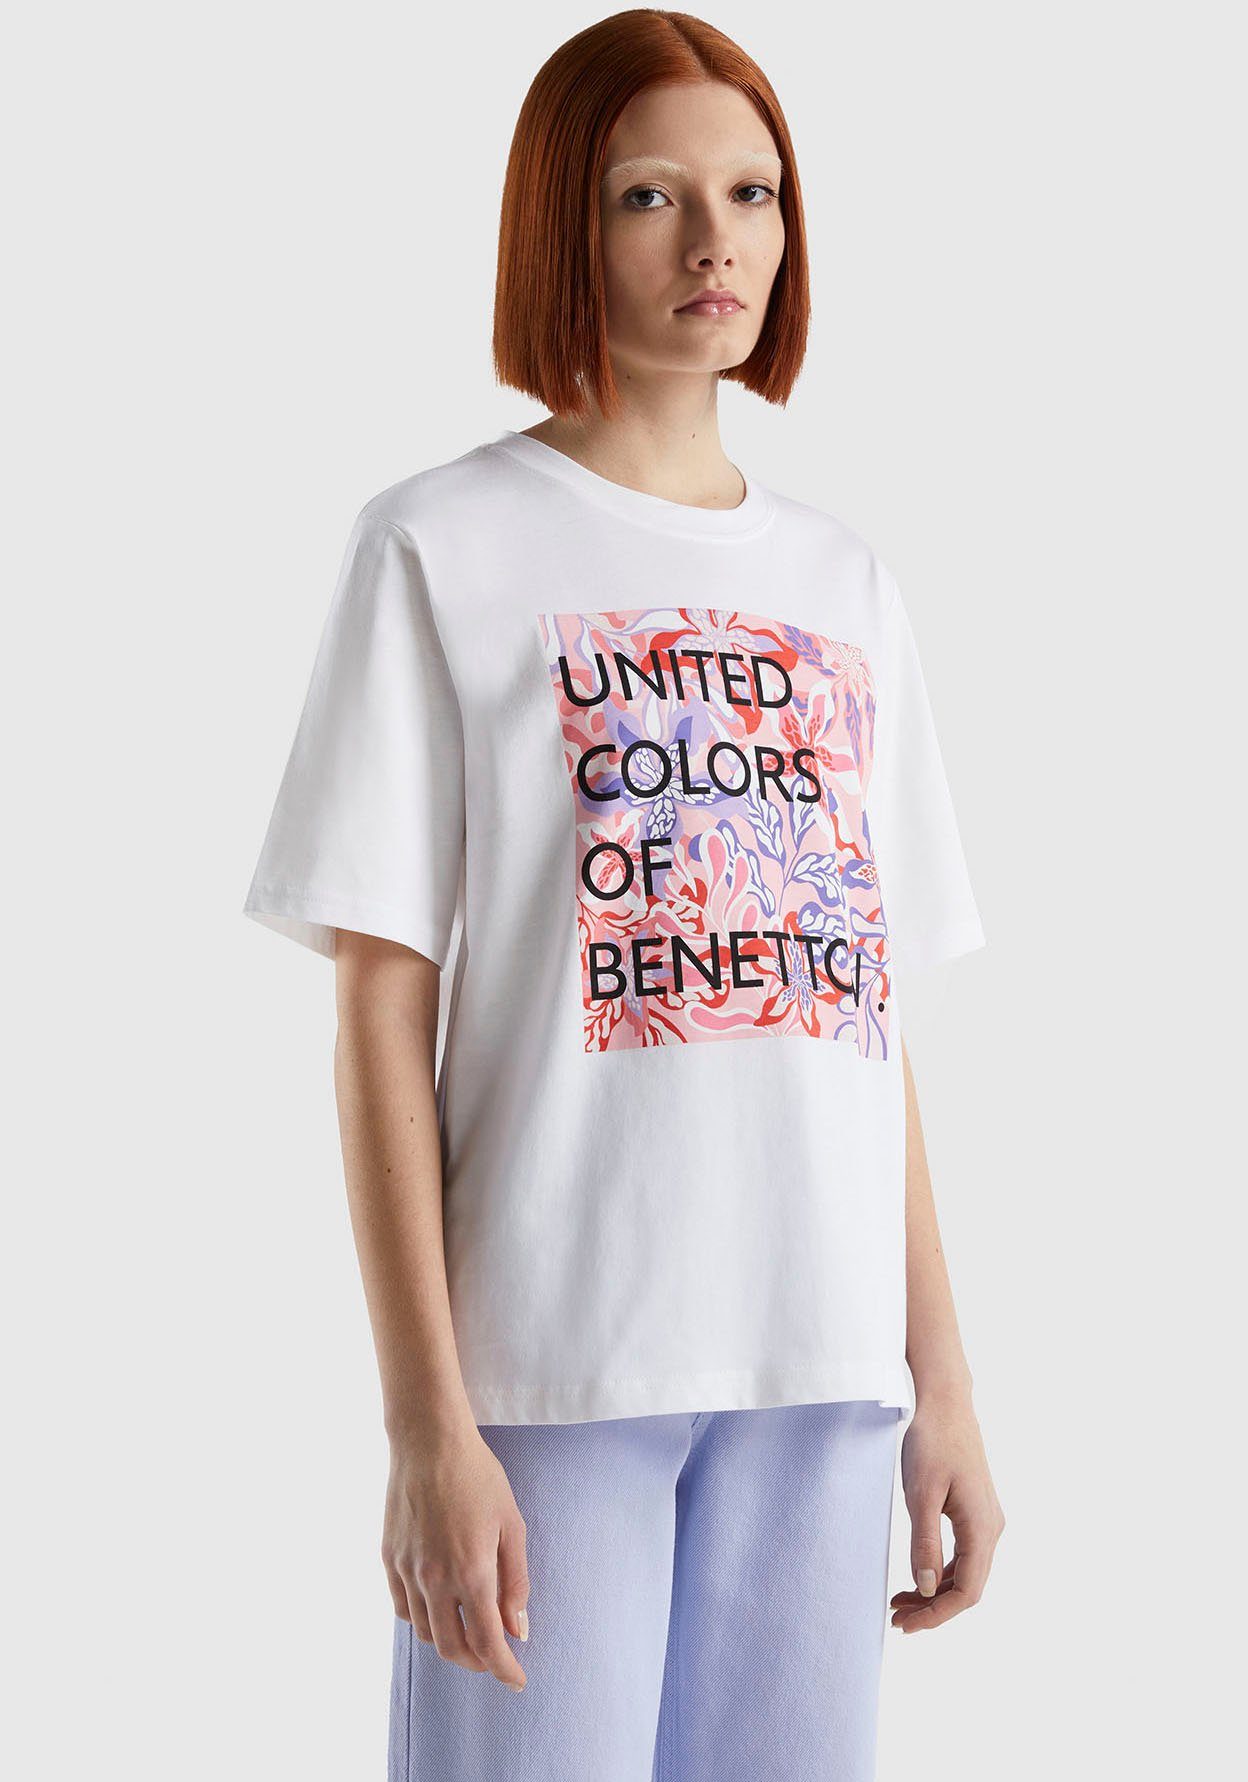 United Colors of Benetton T-Shirt weiß mit pink | T-Shirts